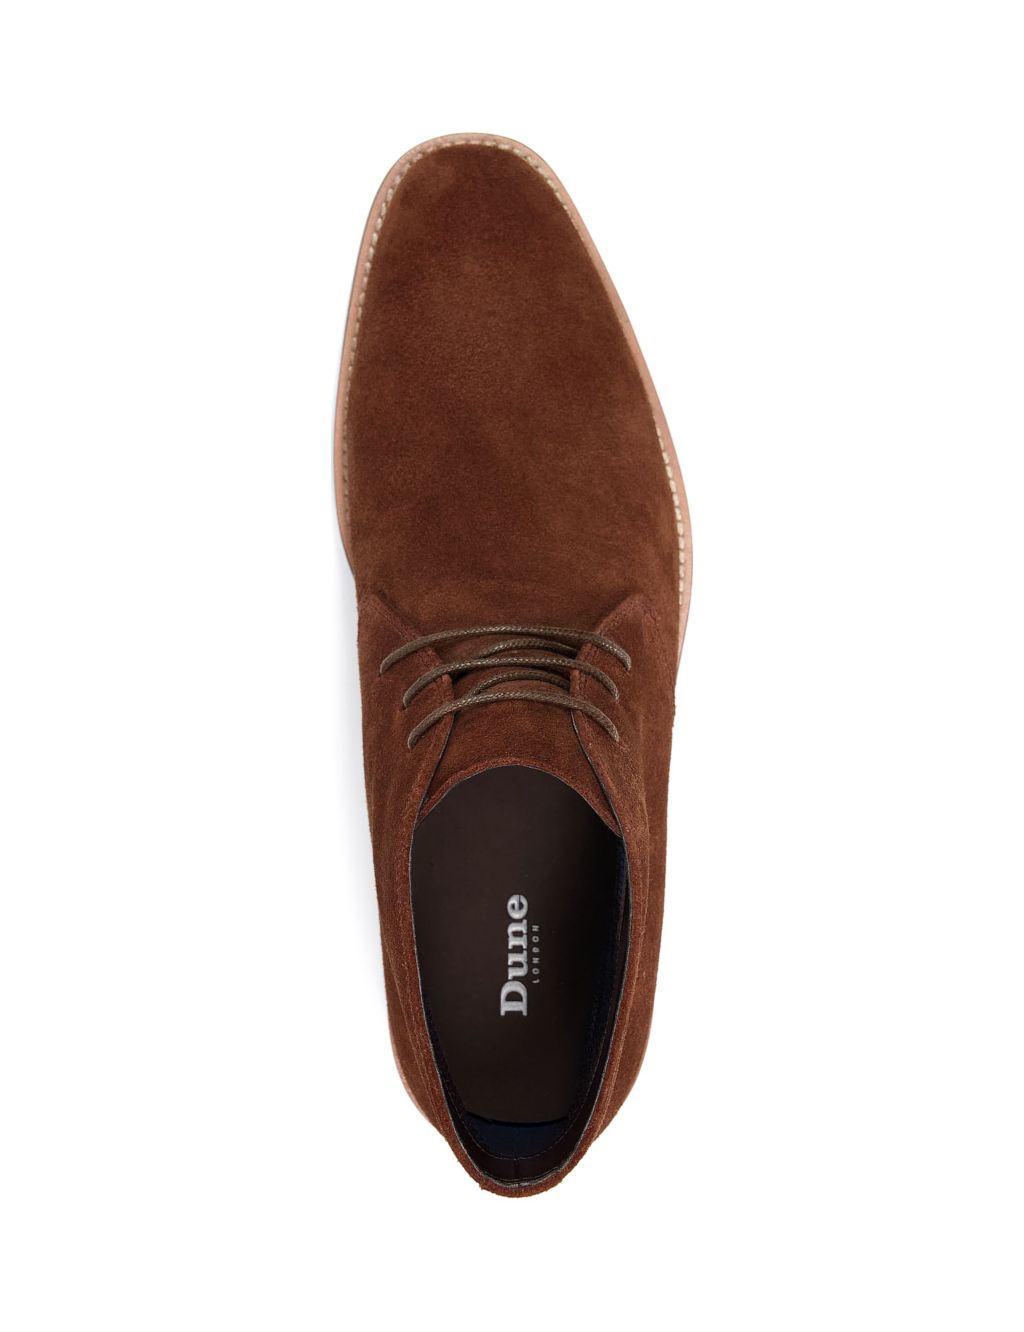 Suede Chukka Boots image 3